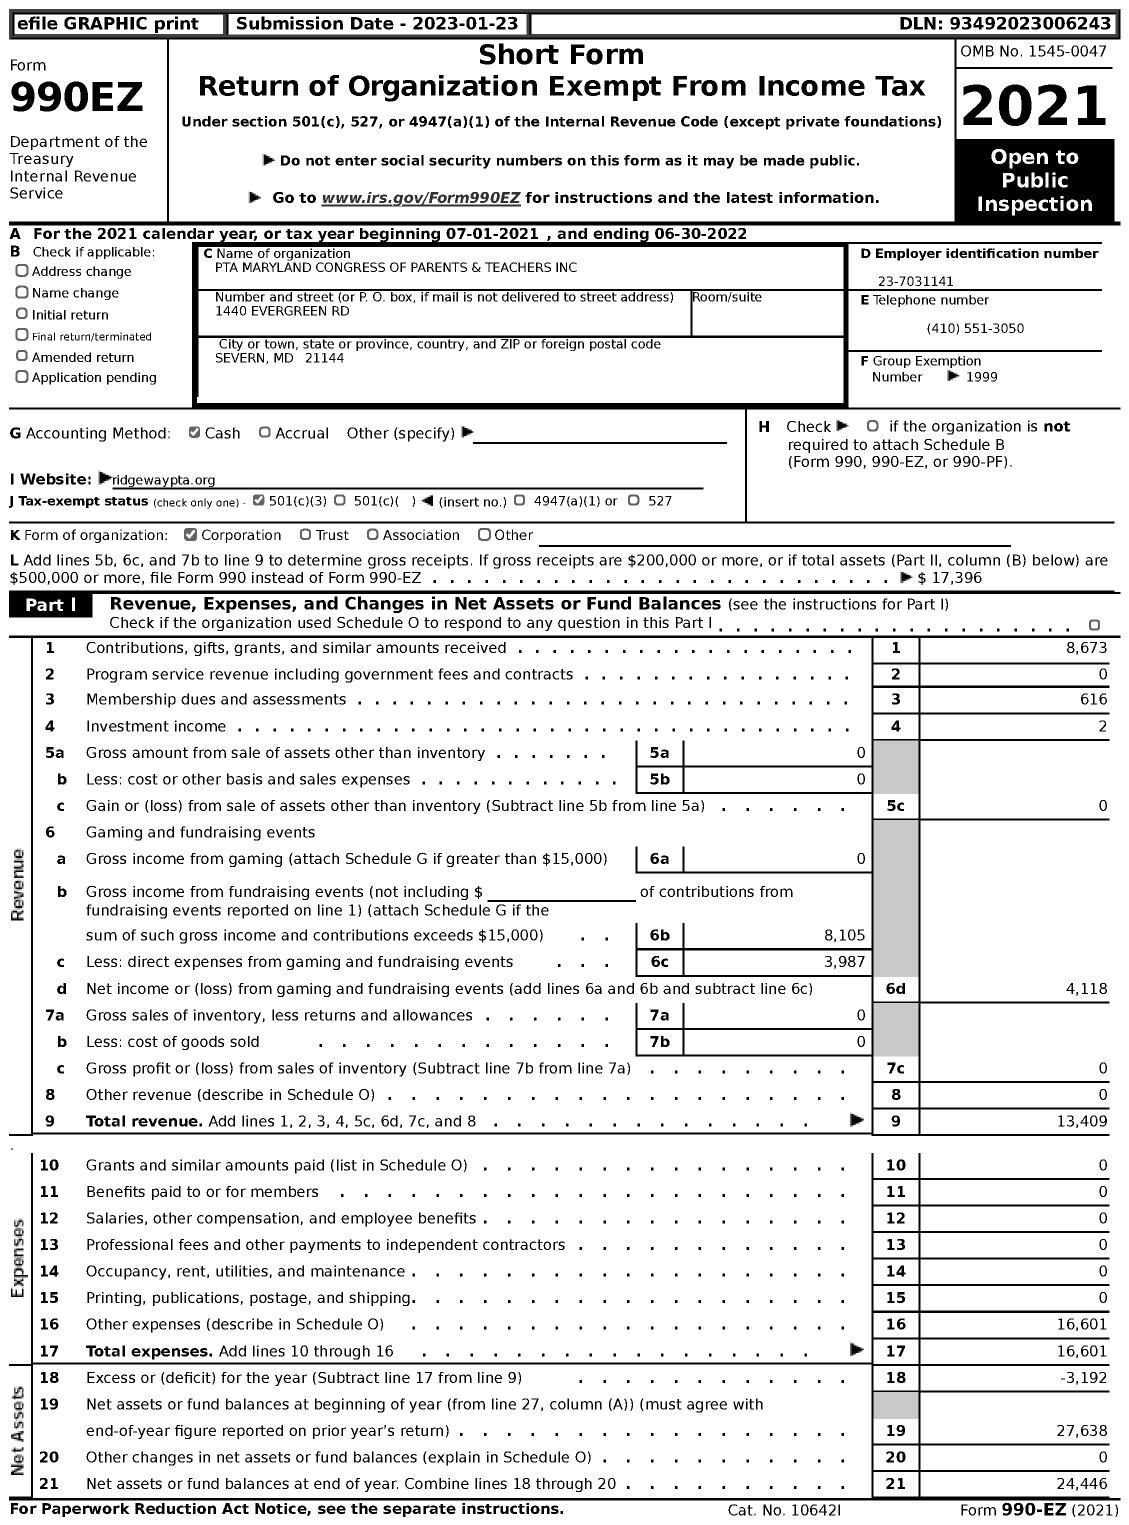 Image of first page of 2021 Form 990EZ for PTA Maryland Congress of Parents and Teachers / Ridgeway PTA